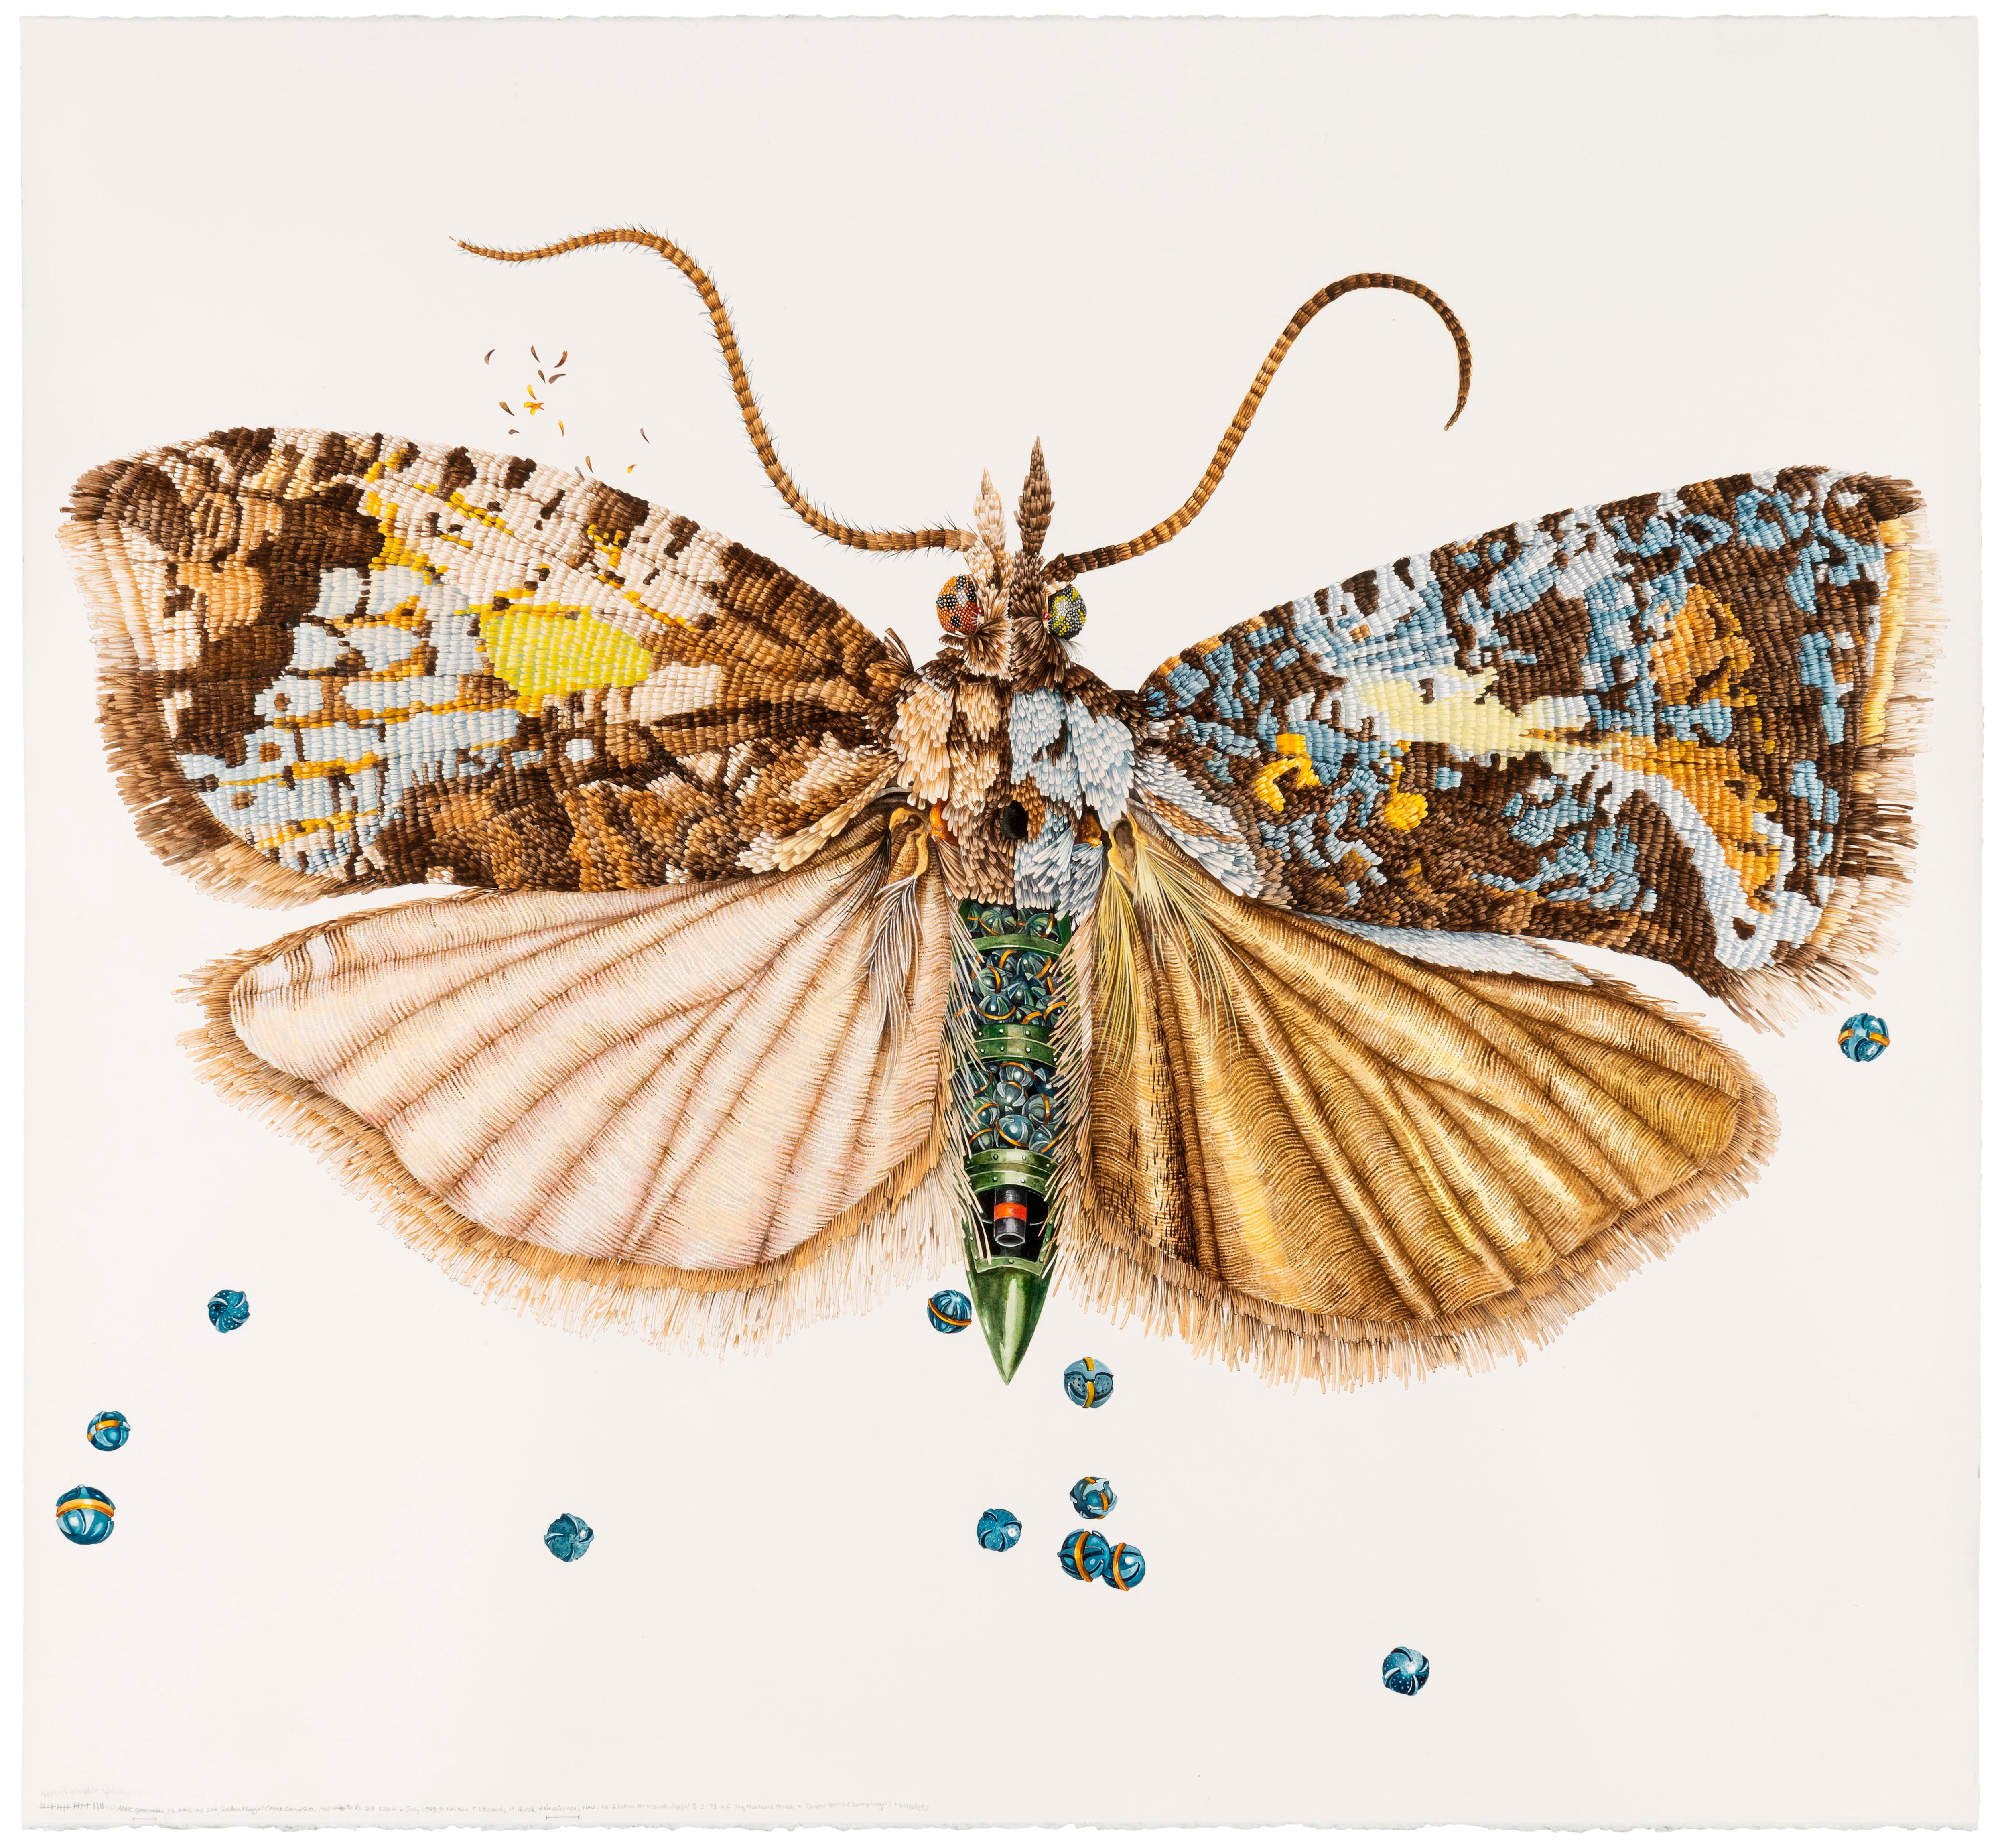 A fine art watercolour of a moth, with embroidery-like detail. The body of the moth resembles a bullet or a bomb.